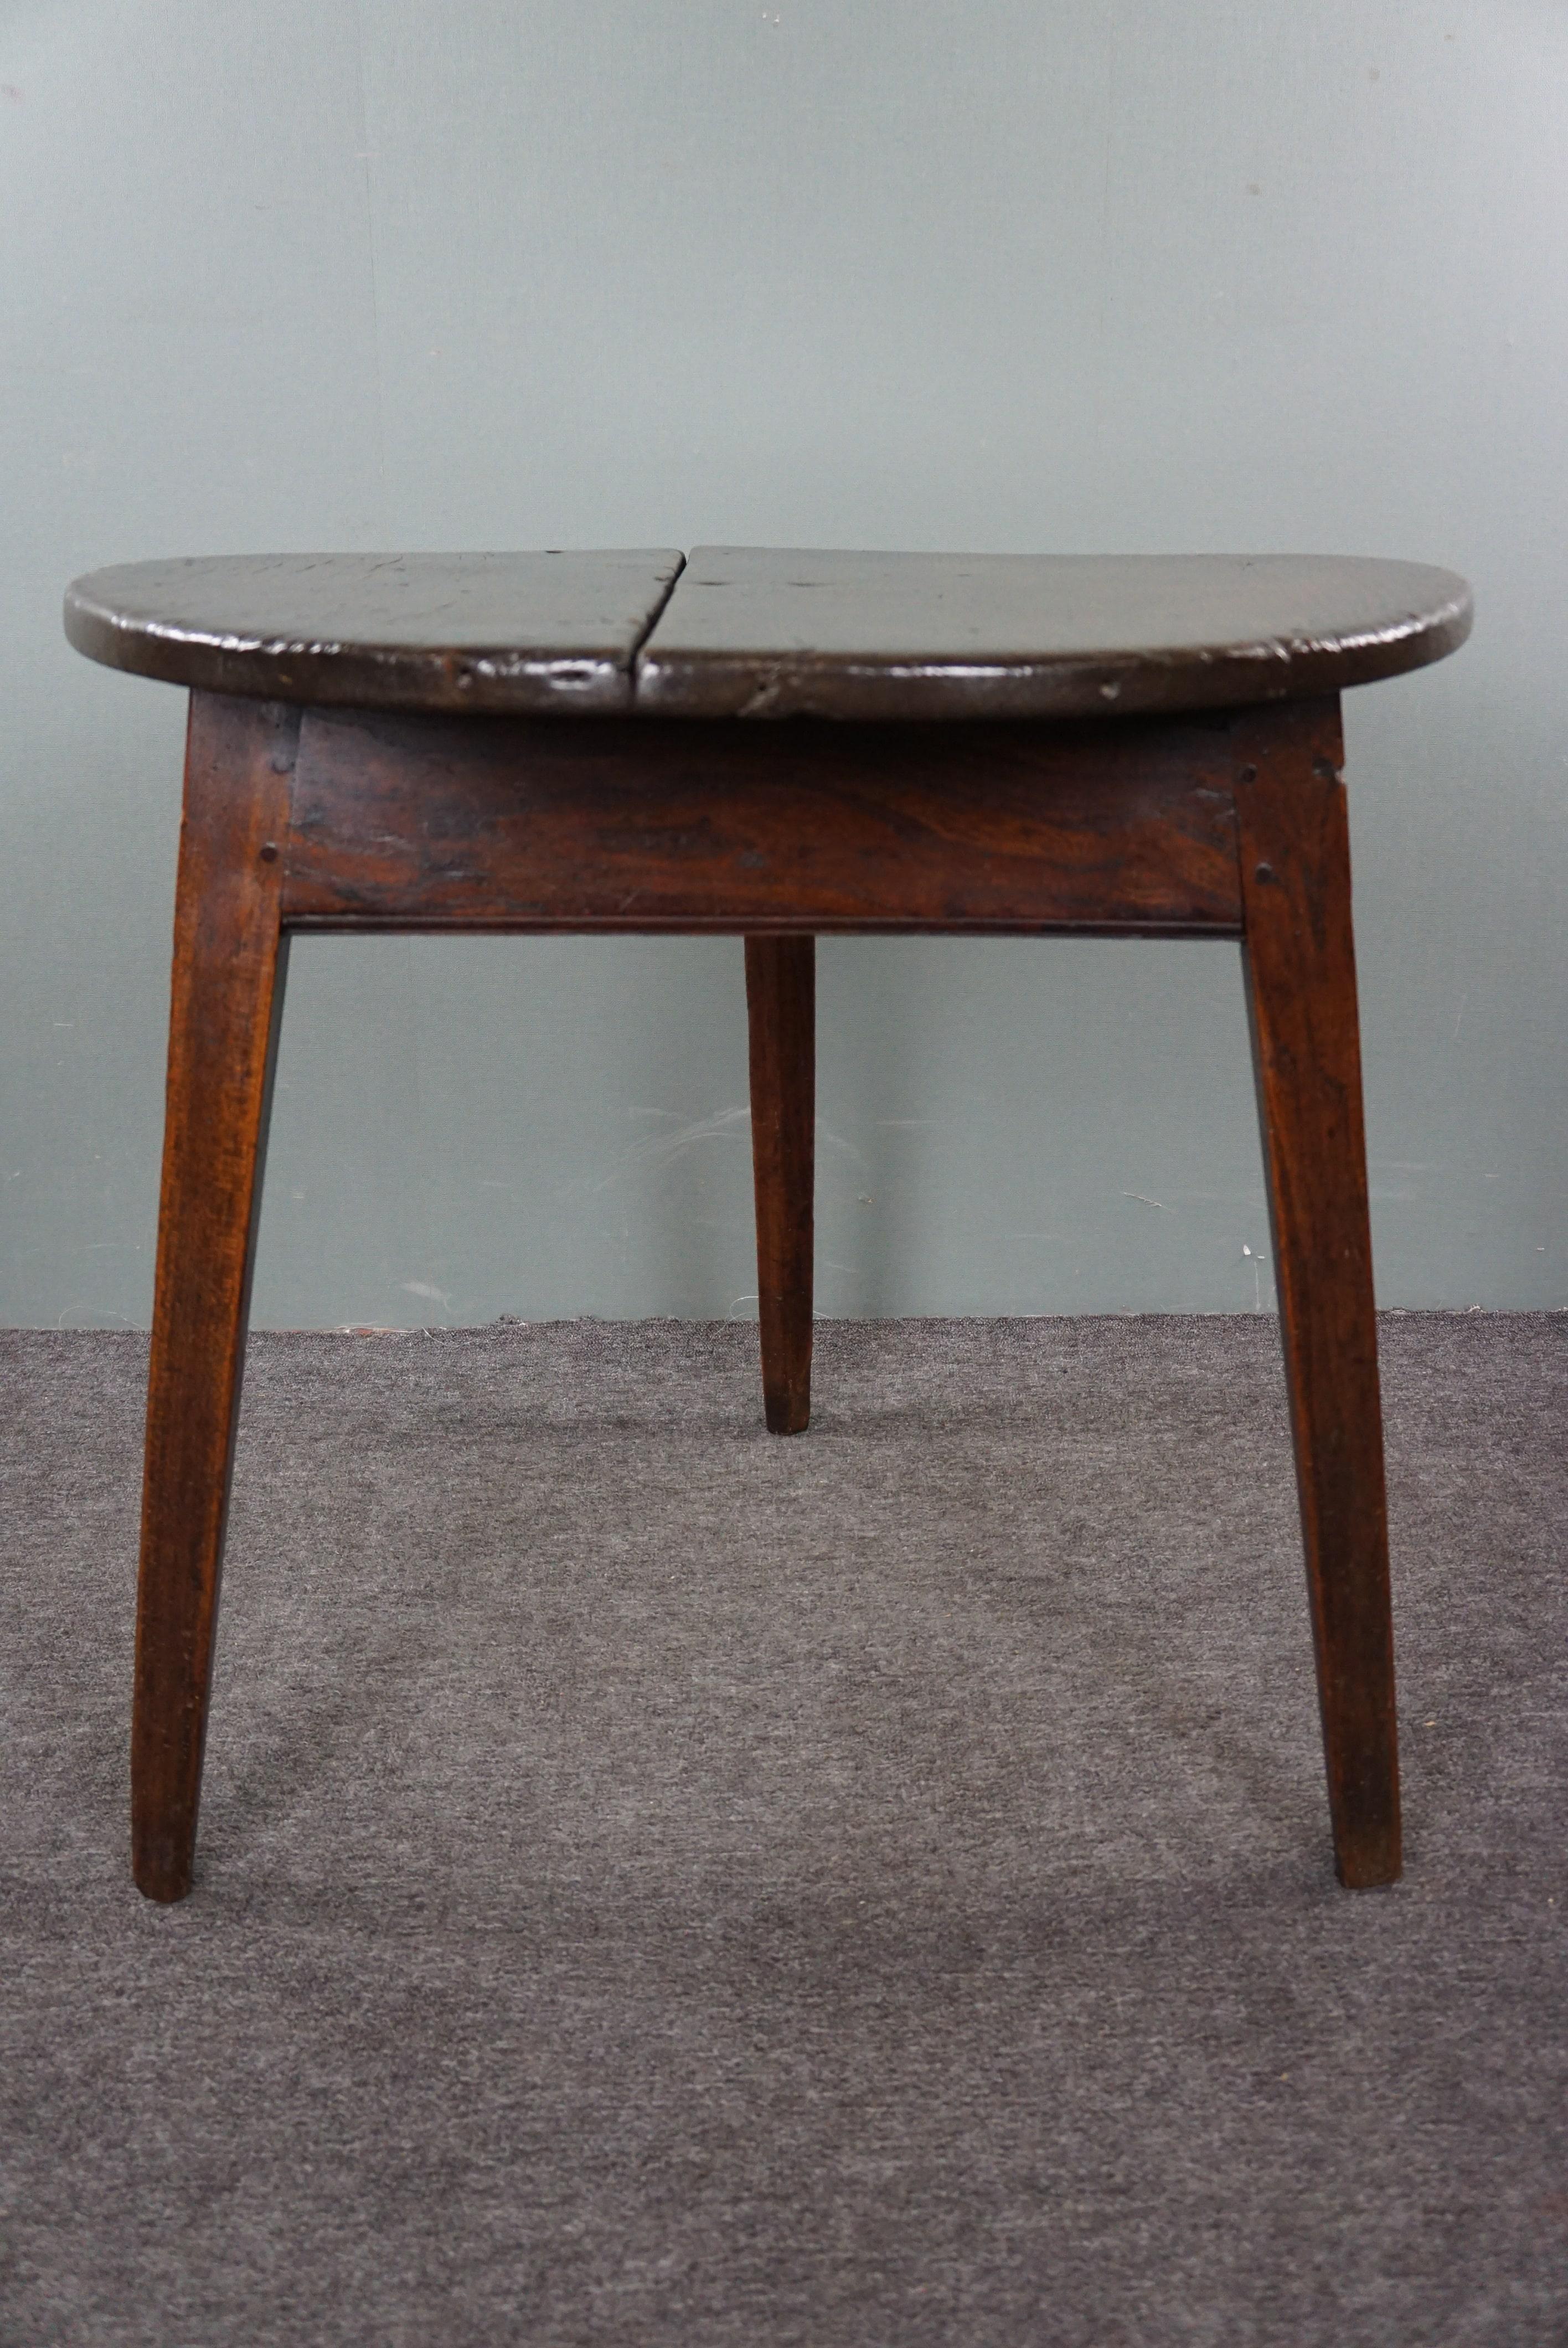 Offered is this excellent 18th-century English cricket table with a wonderful appearance. If you're a true enthusiast of beautifully styled interiors, you simply can't overlook genuine antique English cricket tables. The purity and class these